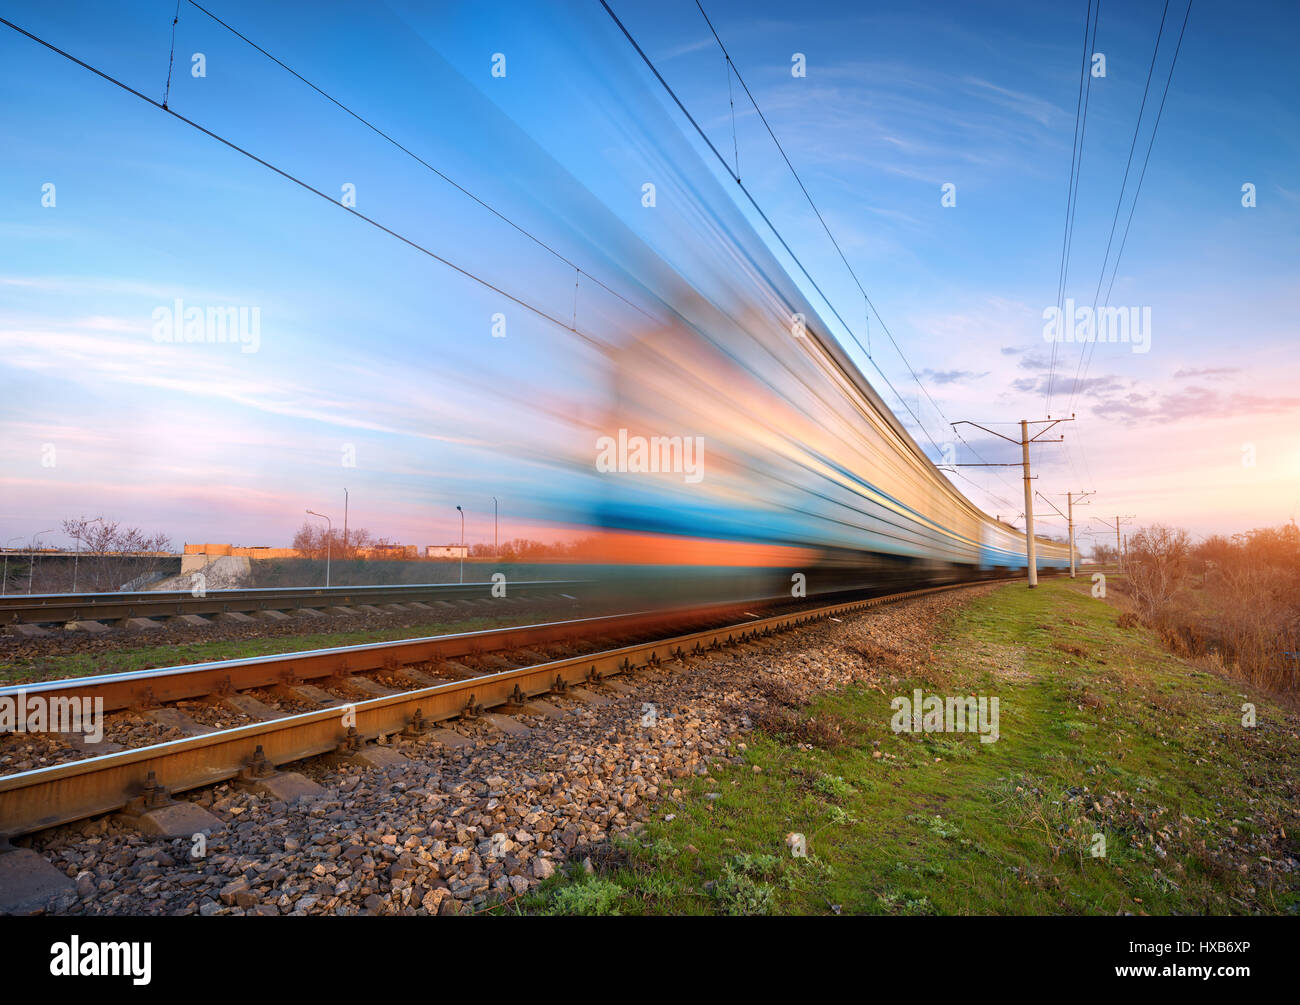 High speed passenger train in motion on railroad at sunset. Blurred commuter train. Railway station against colorful sky. Railroad travel, railway tou Stock Photo